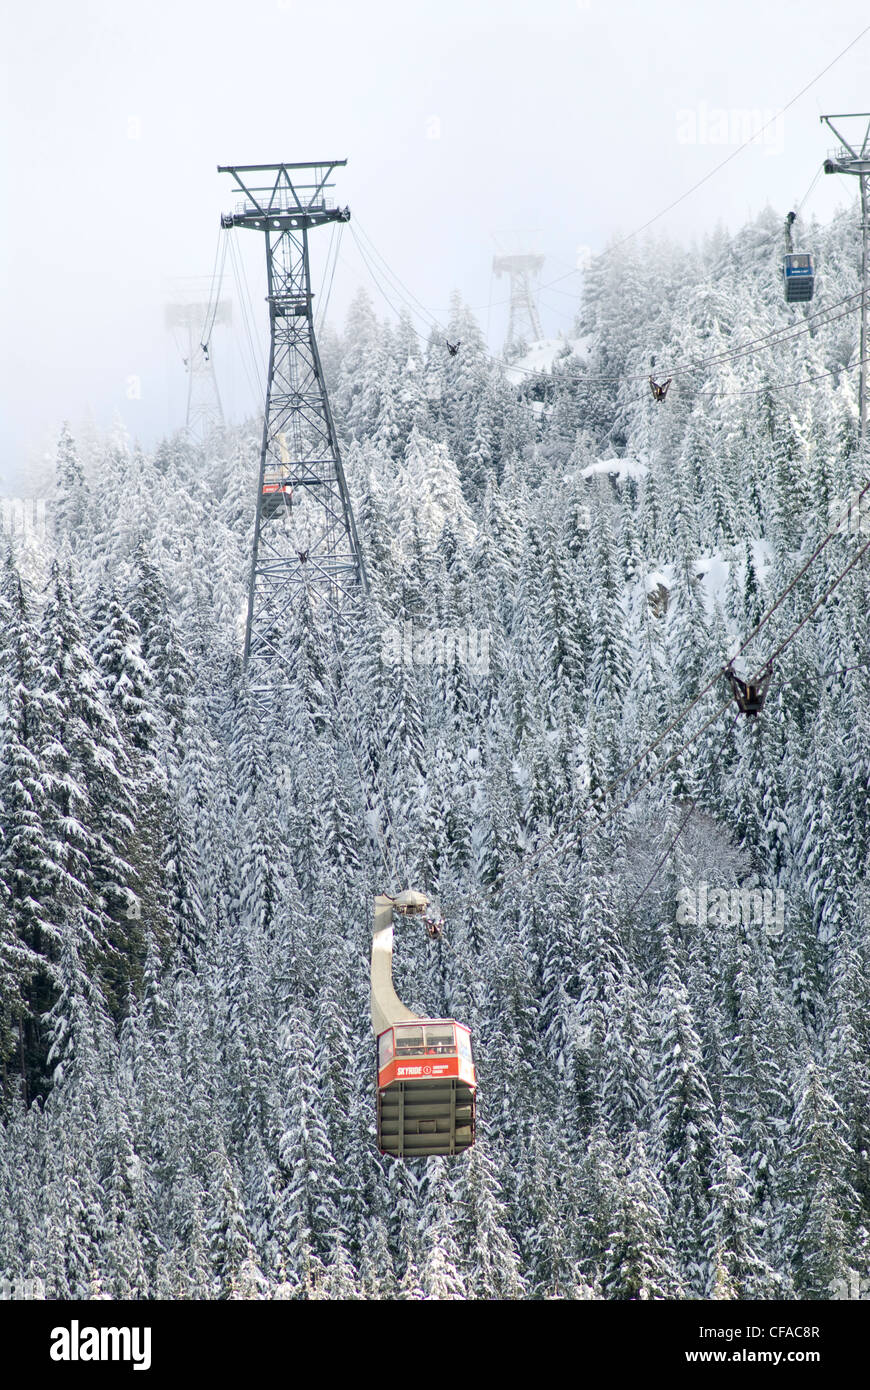 The Grouse Mountain Skyride travels up towards the top of Grouse Mountain in North Vancouver, British Columbia, Canada. Stock Photo